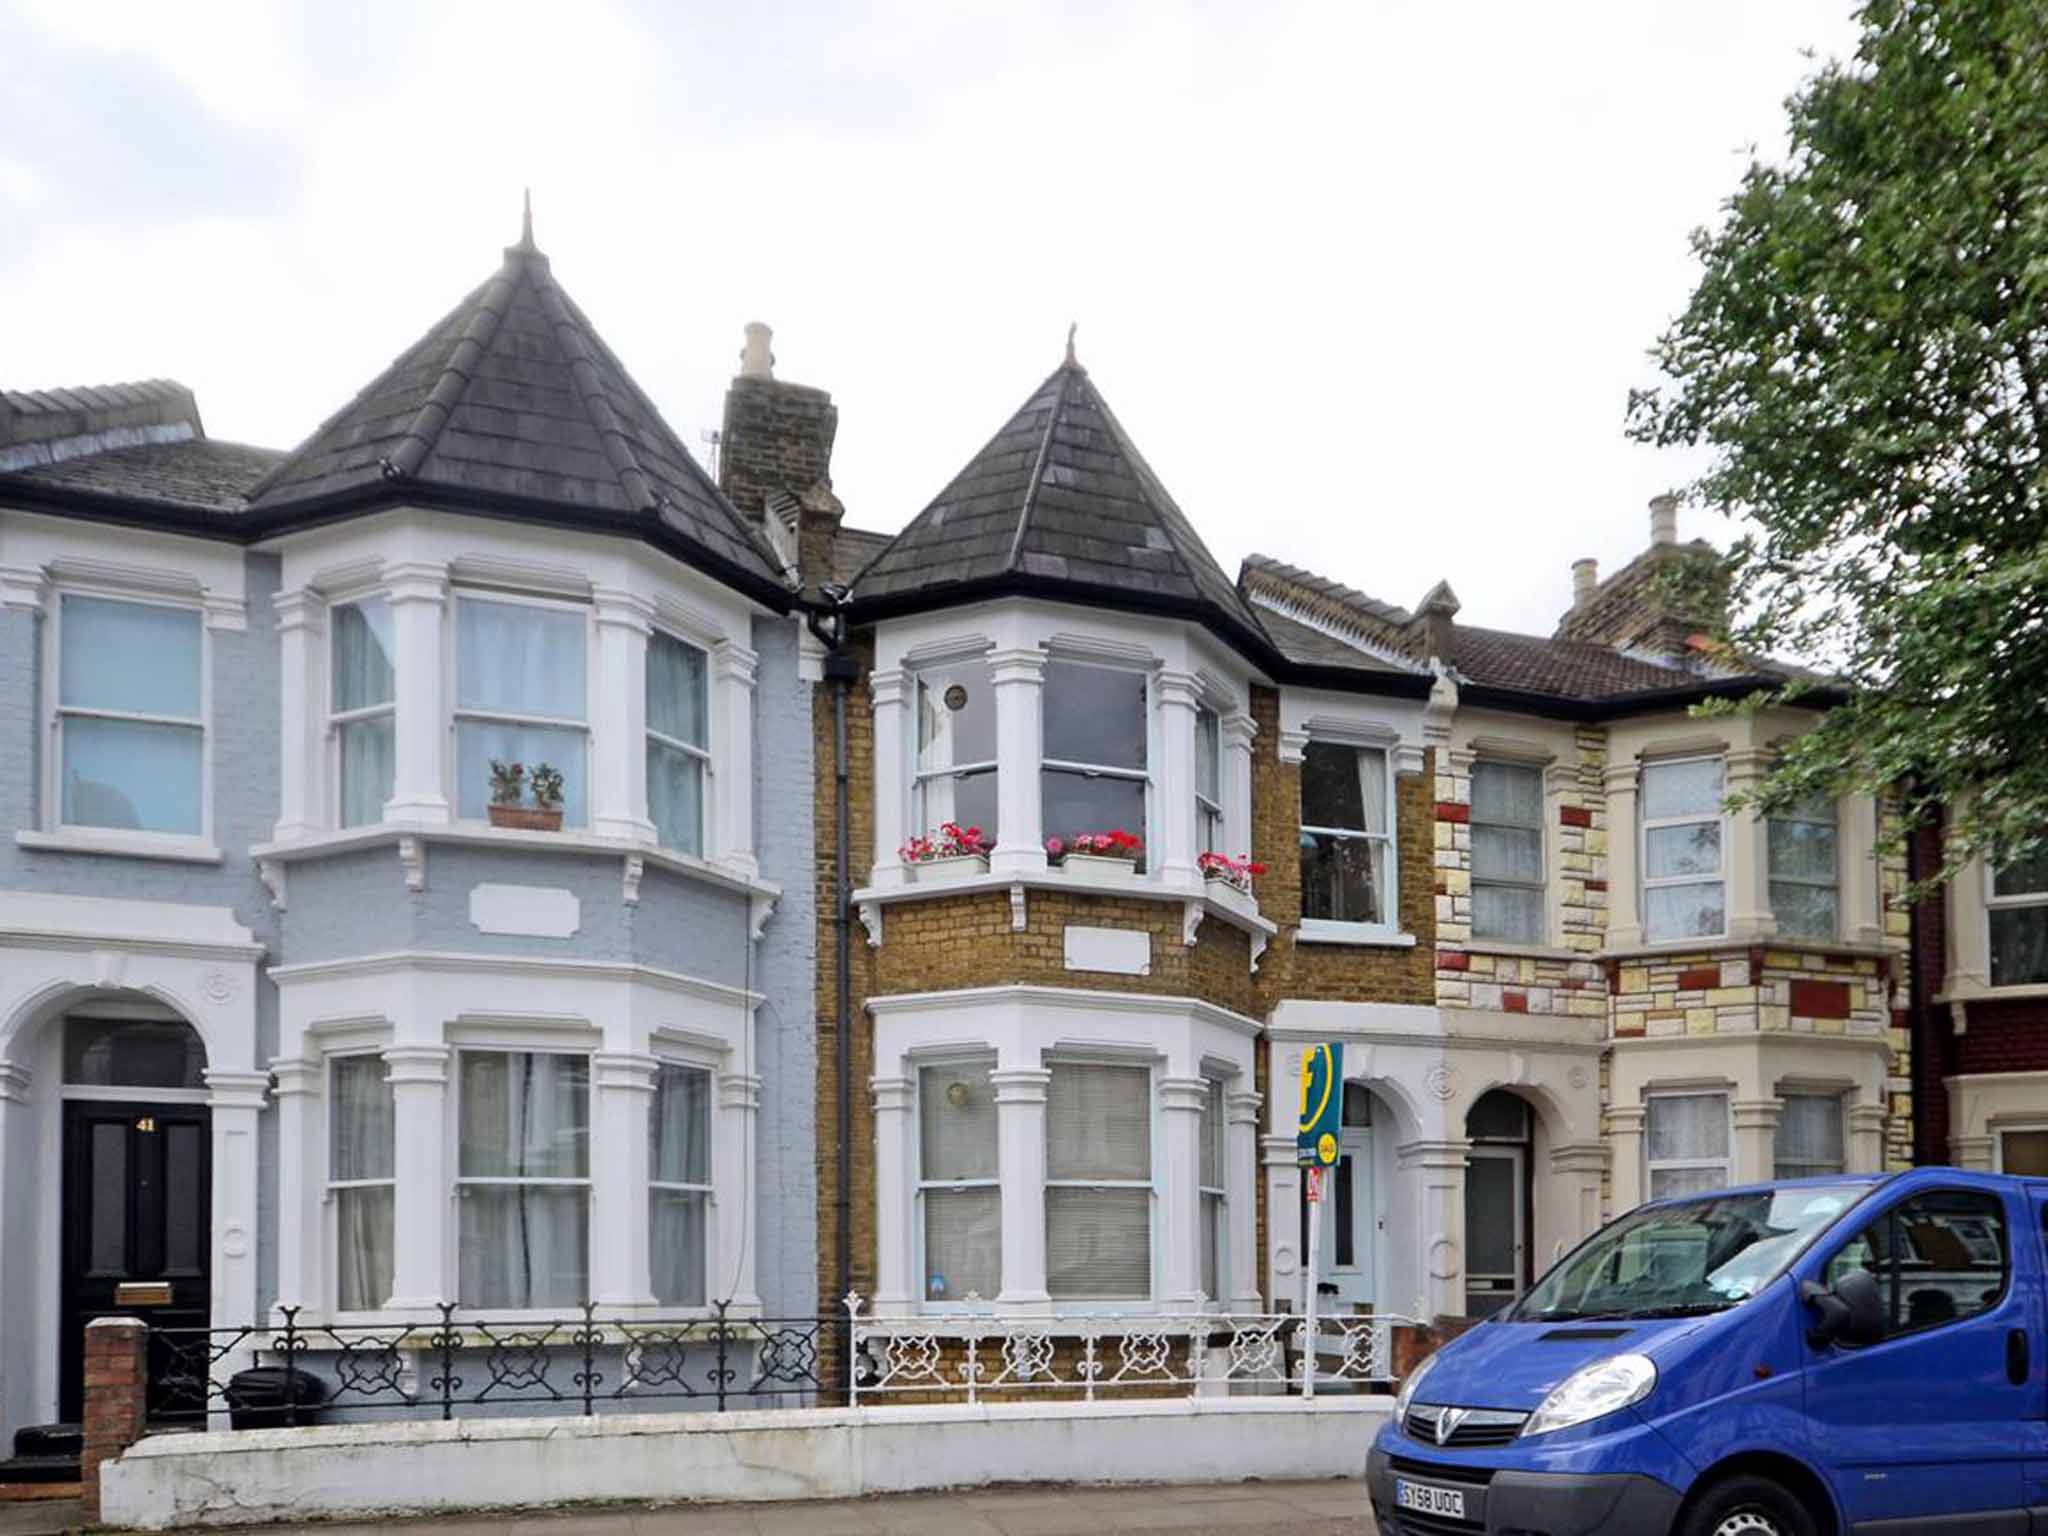 Two bedroom maisonette for sale in Prince George Road, Stoke Newington N16. On with Foxtons at £625,000.